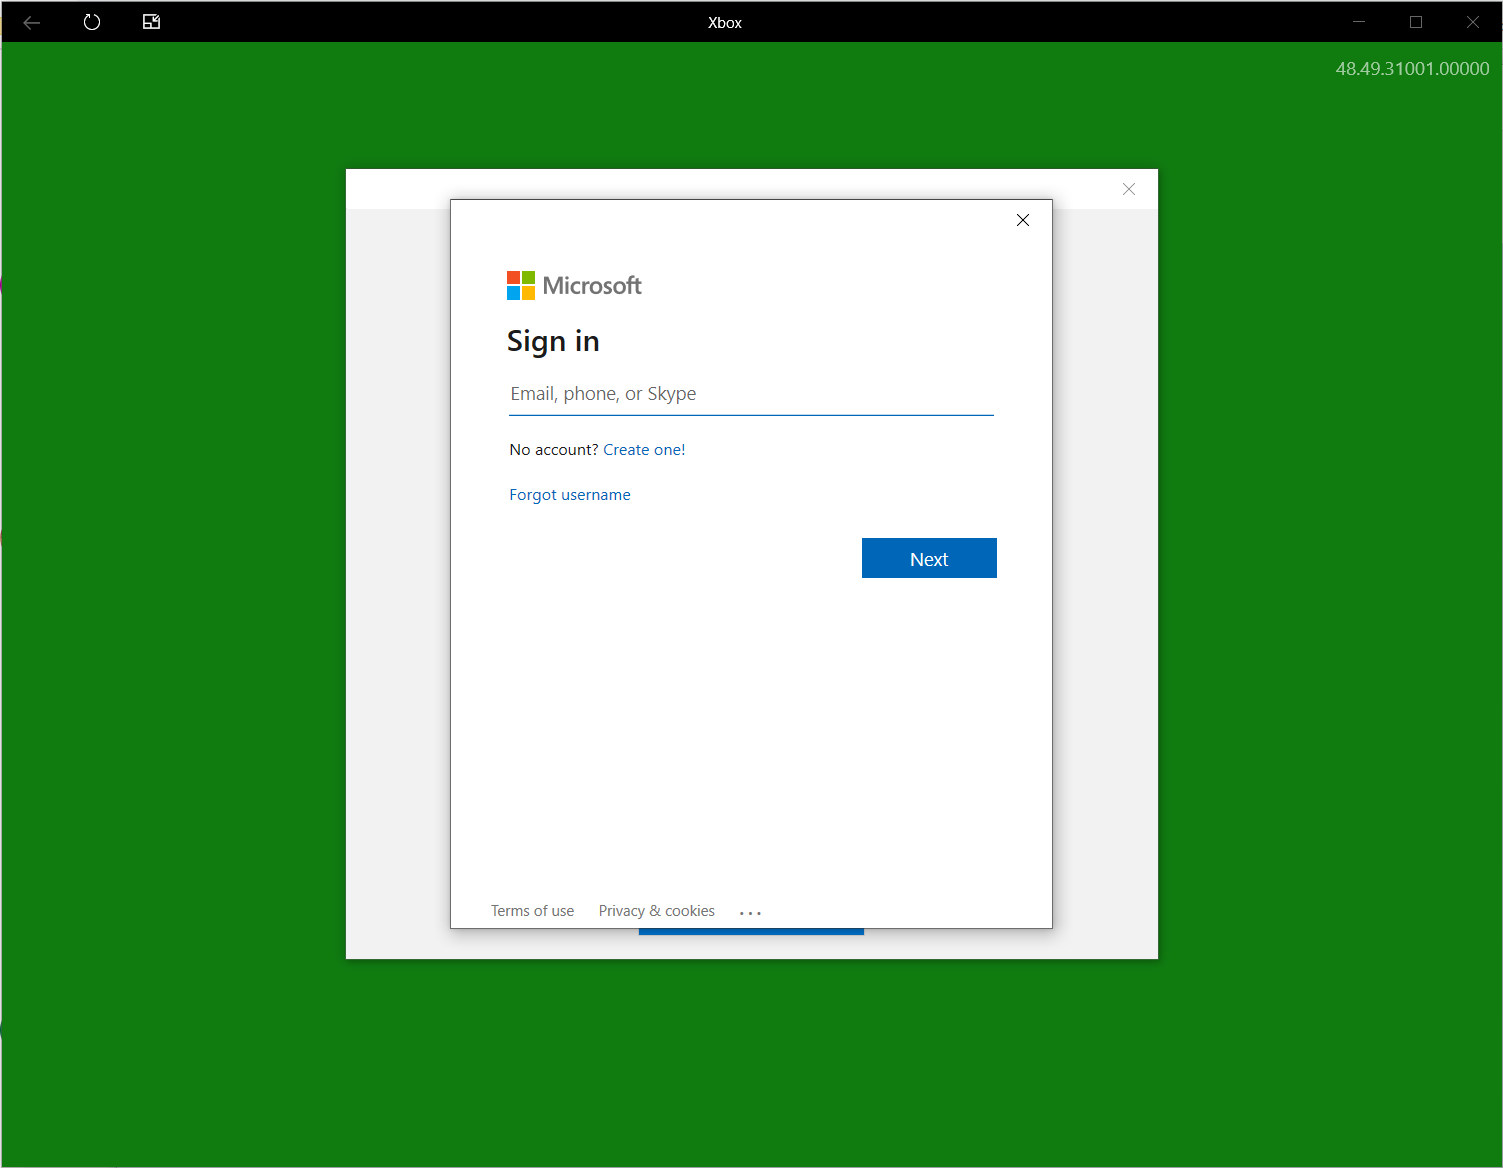 Cannot access "Sign in with a Microsoft account instead" c3d43b7a-a909-48b6-903d-9944ac403cfd?upload=true.png